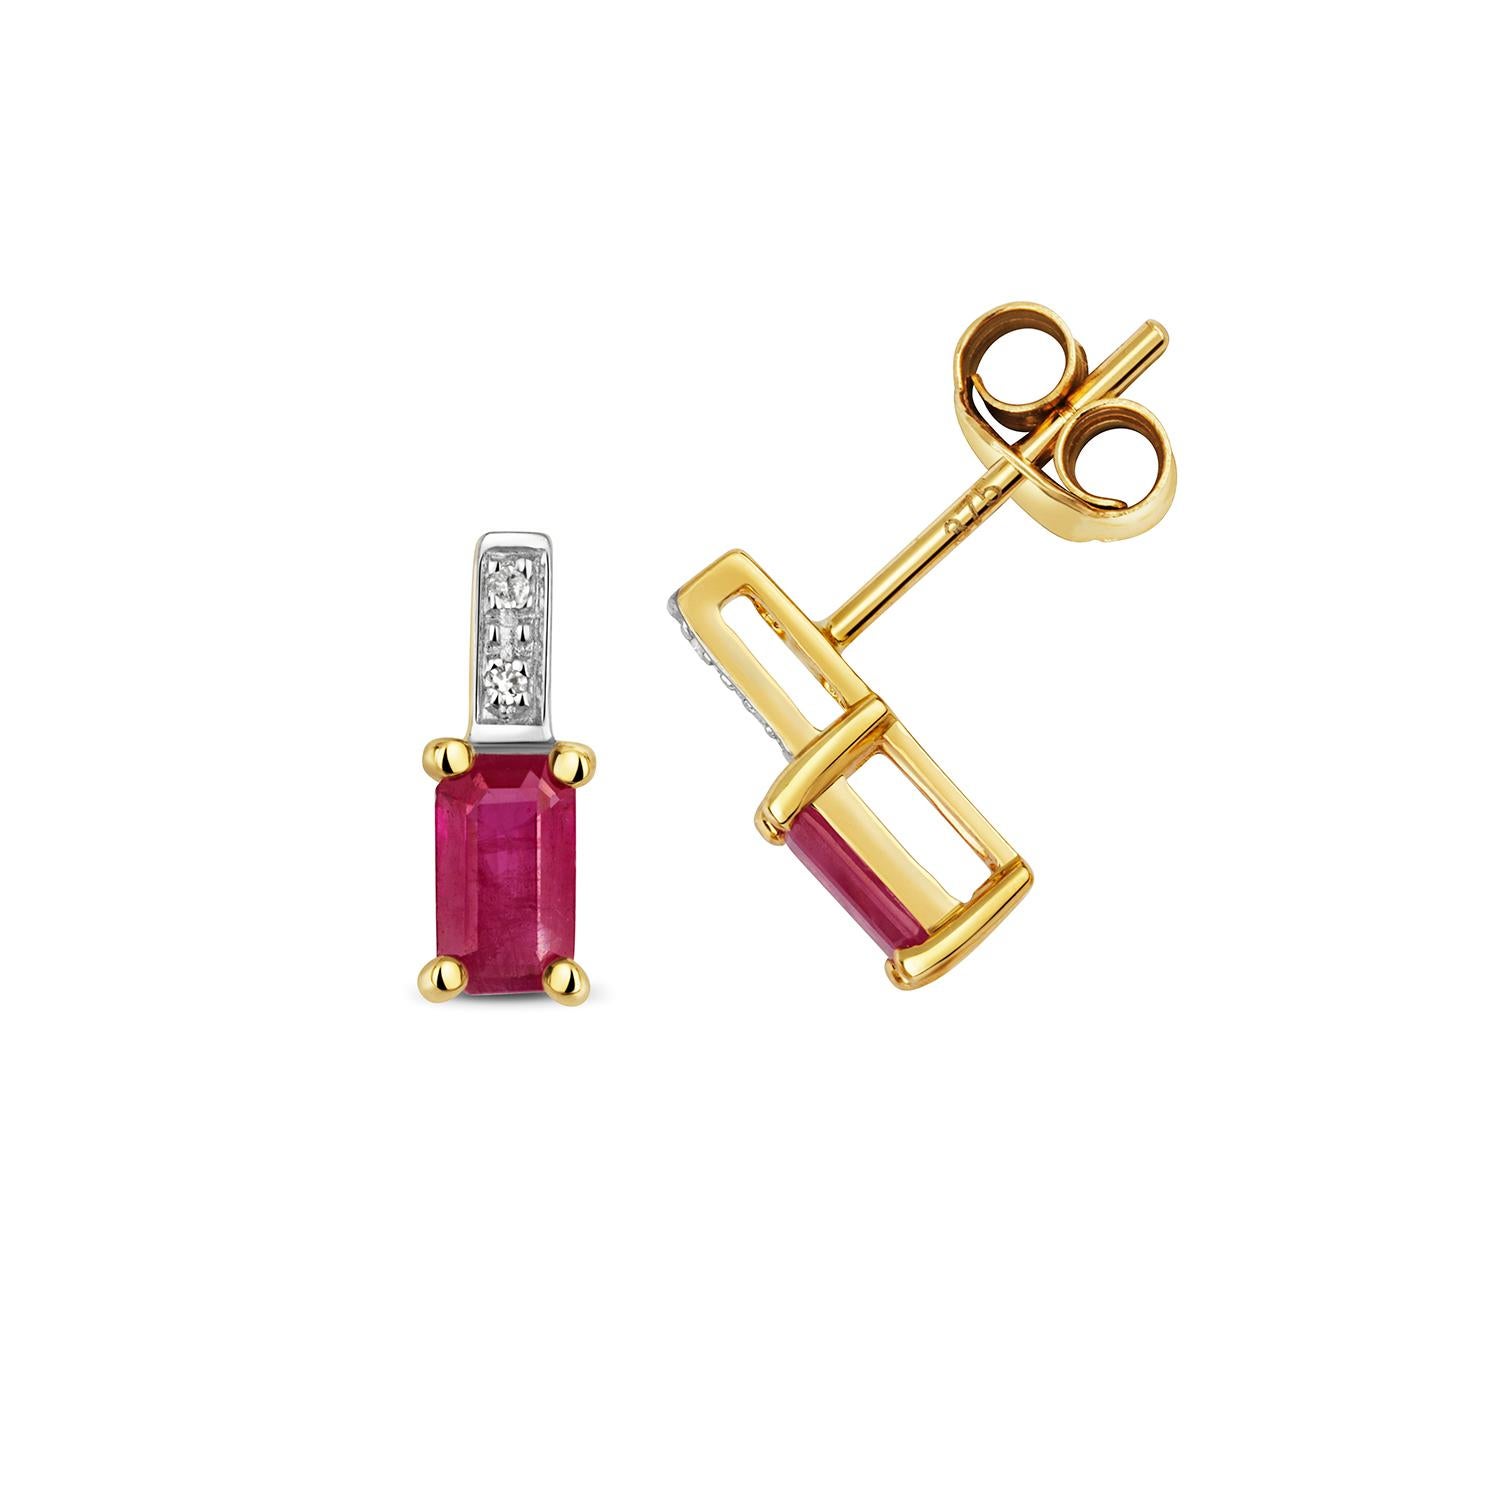 DIAMOND AND RUBY EARRINGS

9CT W/G SC/0.01 RUB/0.60CT

Weight: 0.82g

Number Of Stones:2+2+74

Total Carates:0.610+0.220+0.200